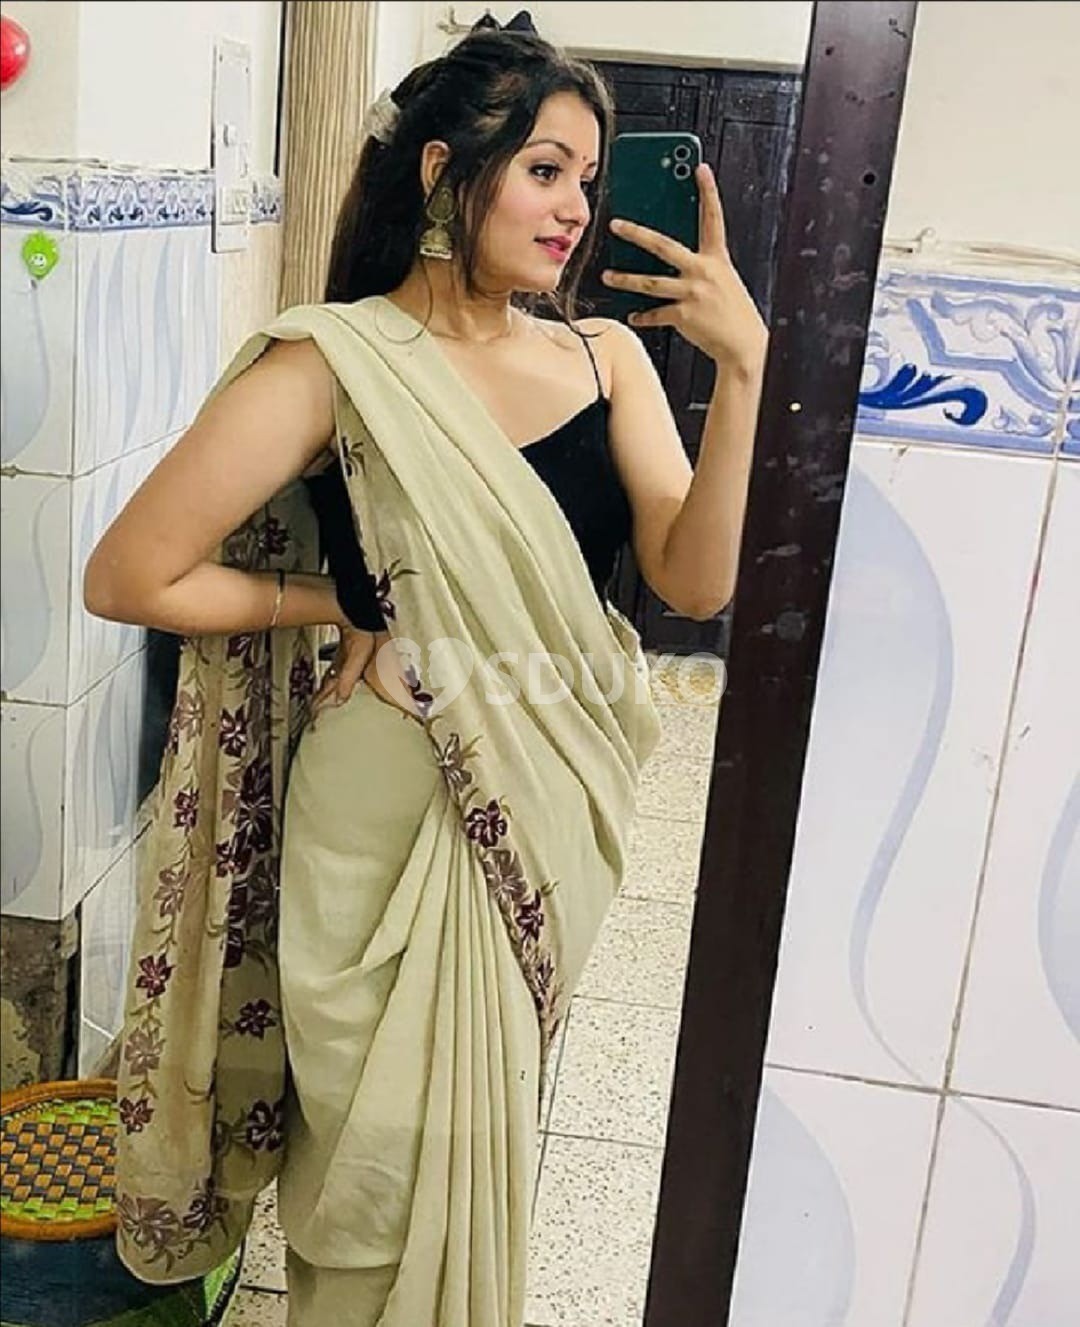 BEST Profile available in KOYAMBEDU 100% SAFE AND SECURE TODAY LOW PRICE UNLIMITED ENJOY HOT COLLEGE GIRL HOUSEWIFE AUNT